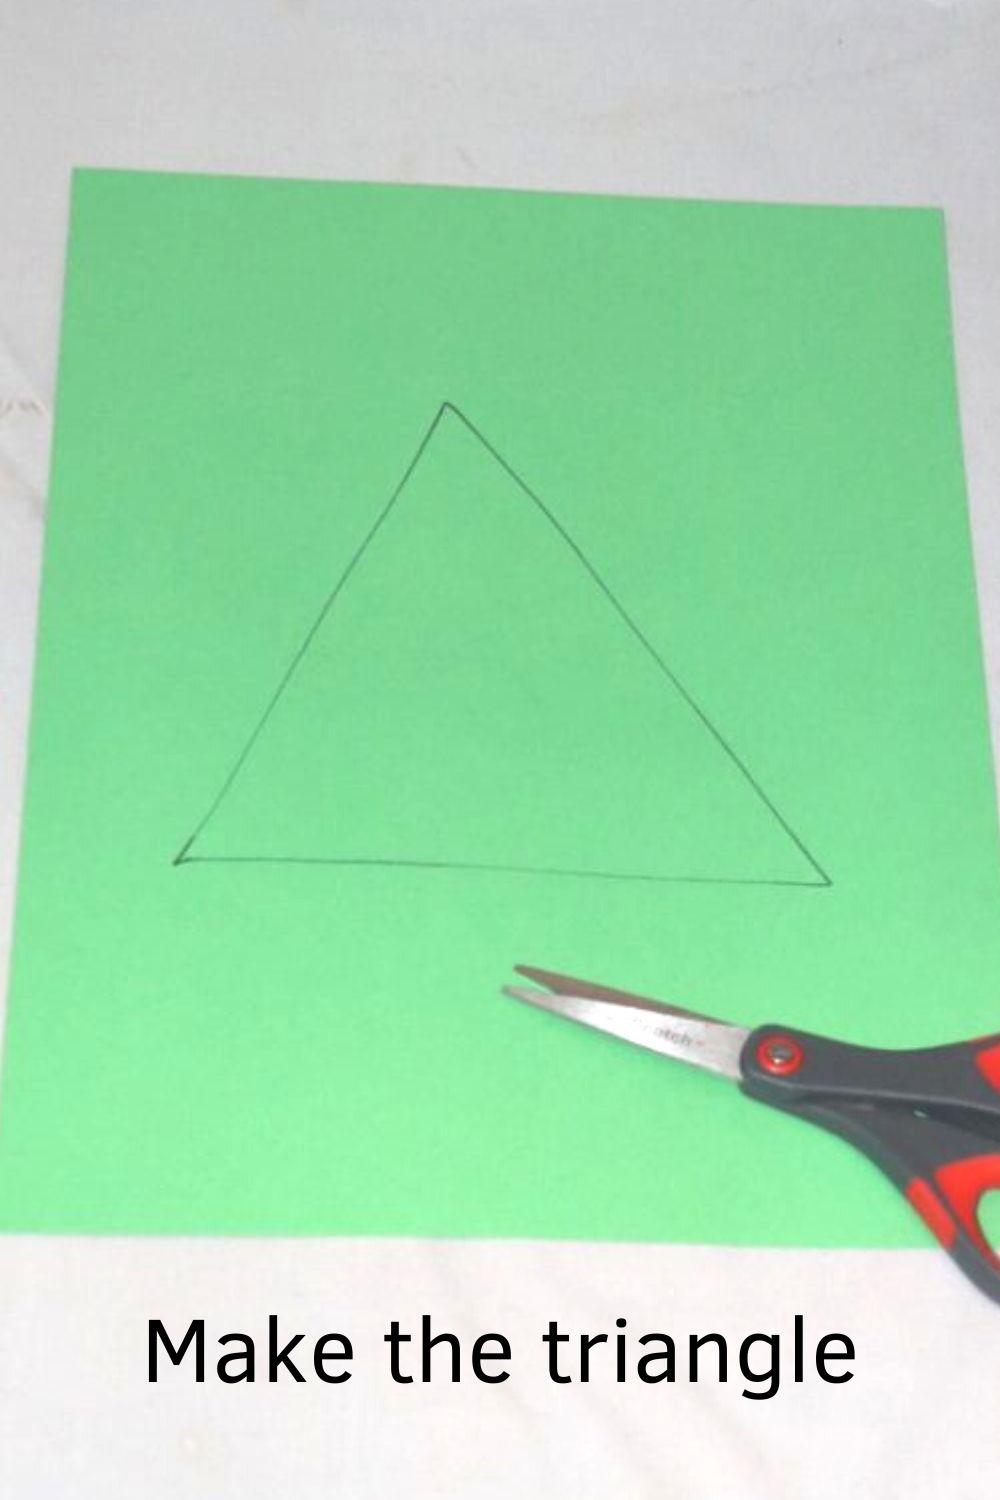 green paper with a triangle on it